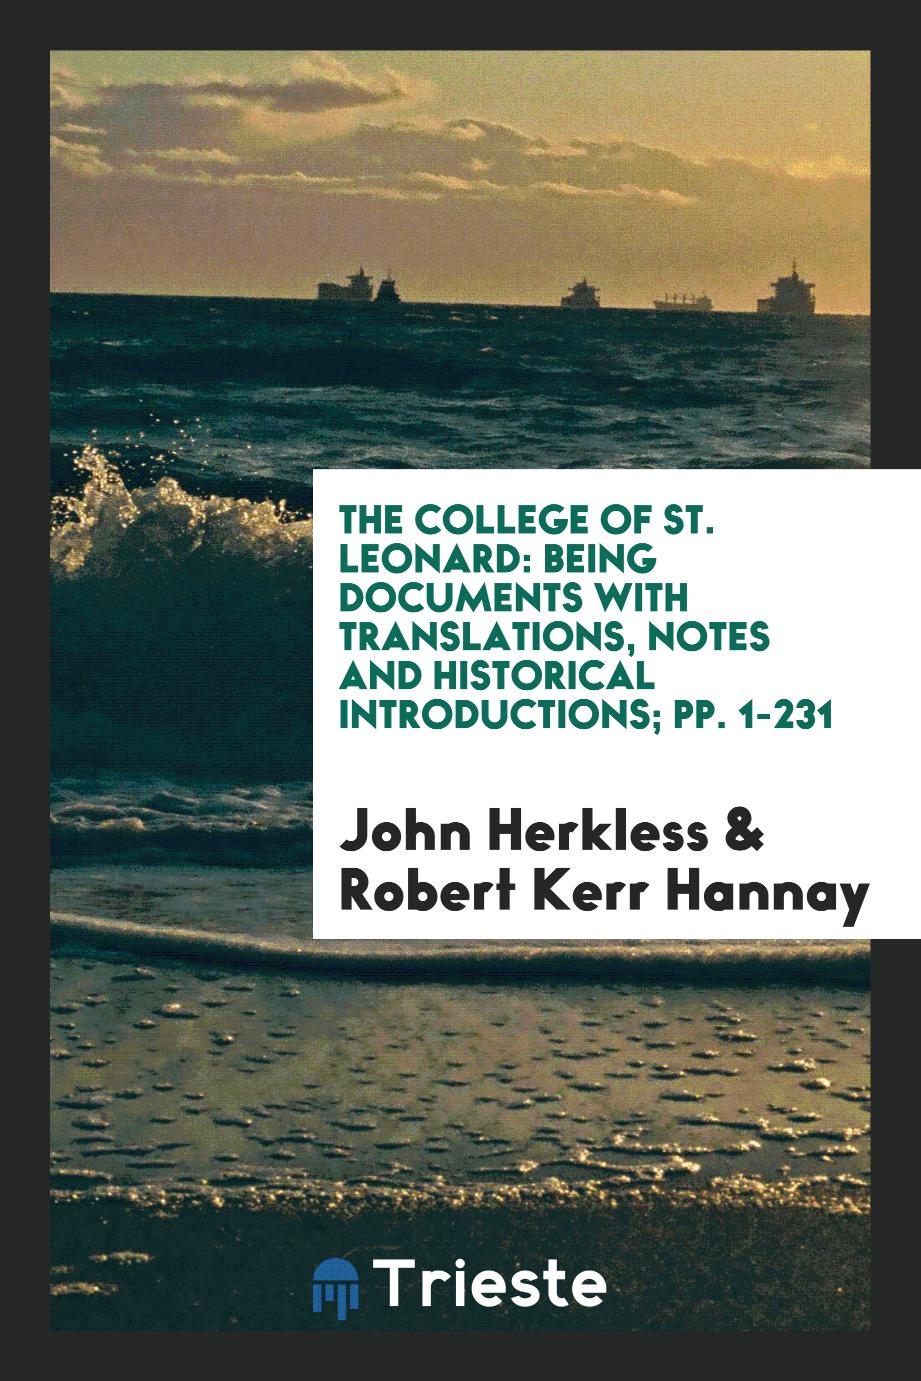 The College of St. Leonard: Being Documents with Translations, Notes and Historical Introductions; pp. 1-231